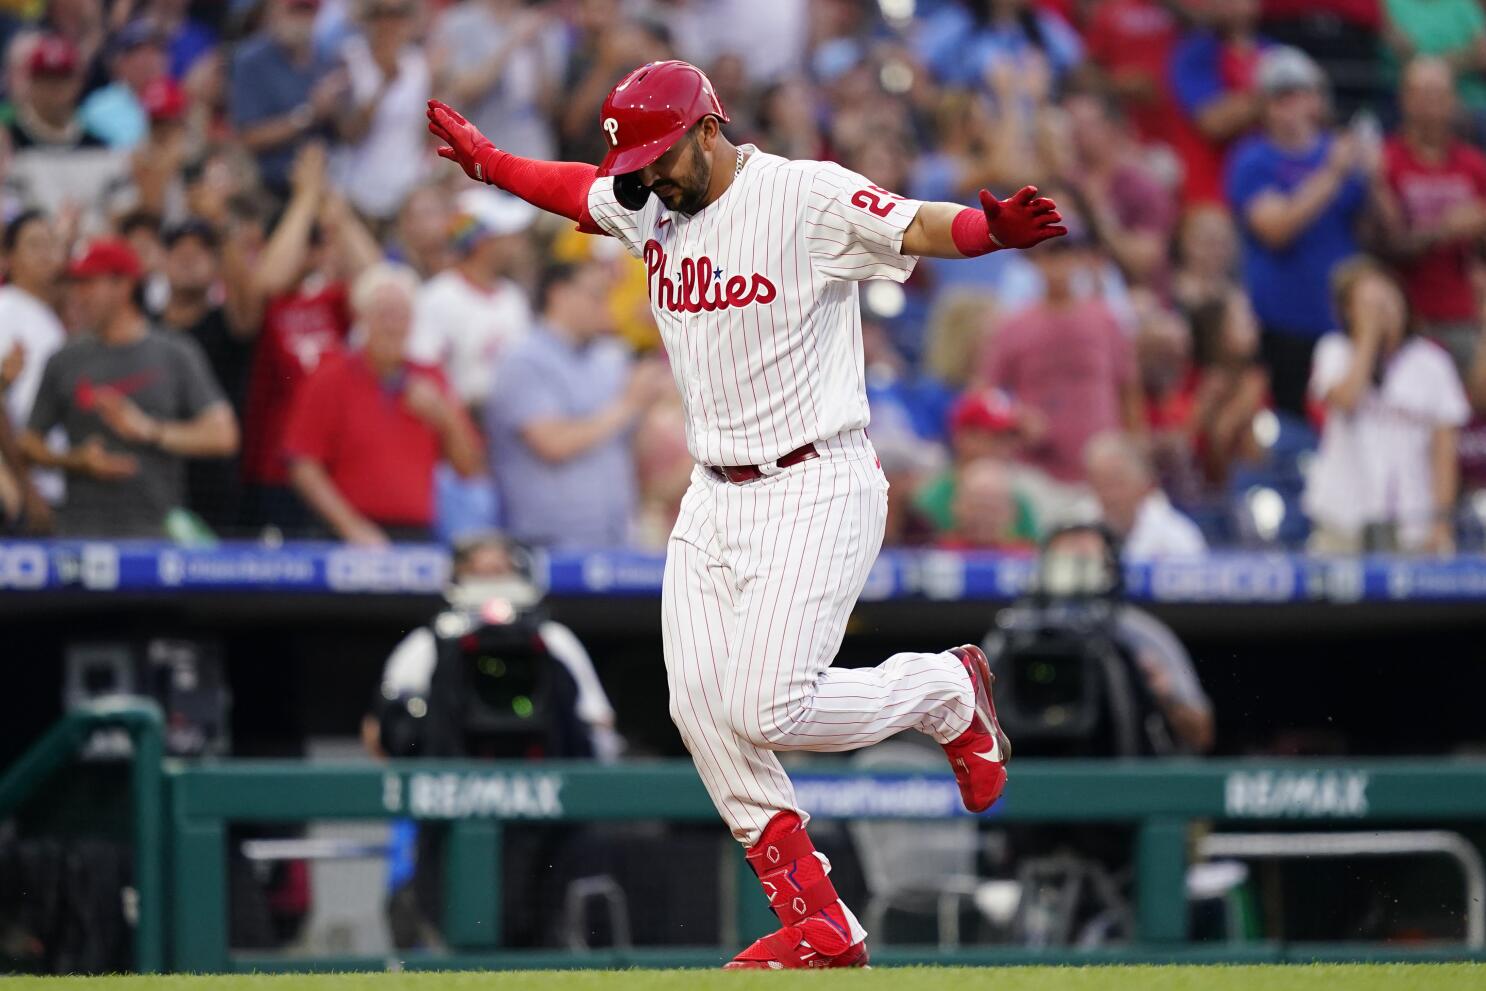 Philadelphia Phillies fans react to Rhys Hoskins being carted off